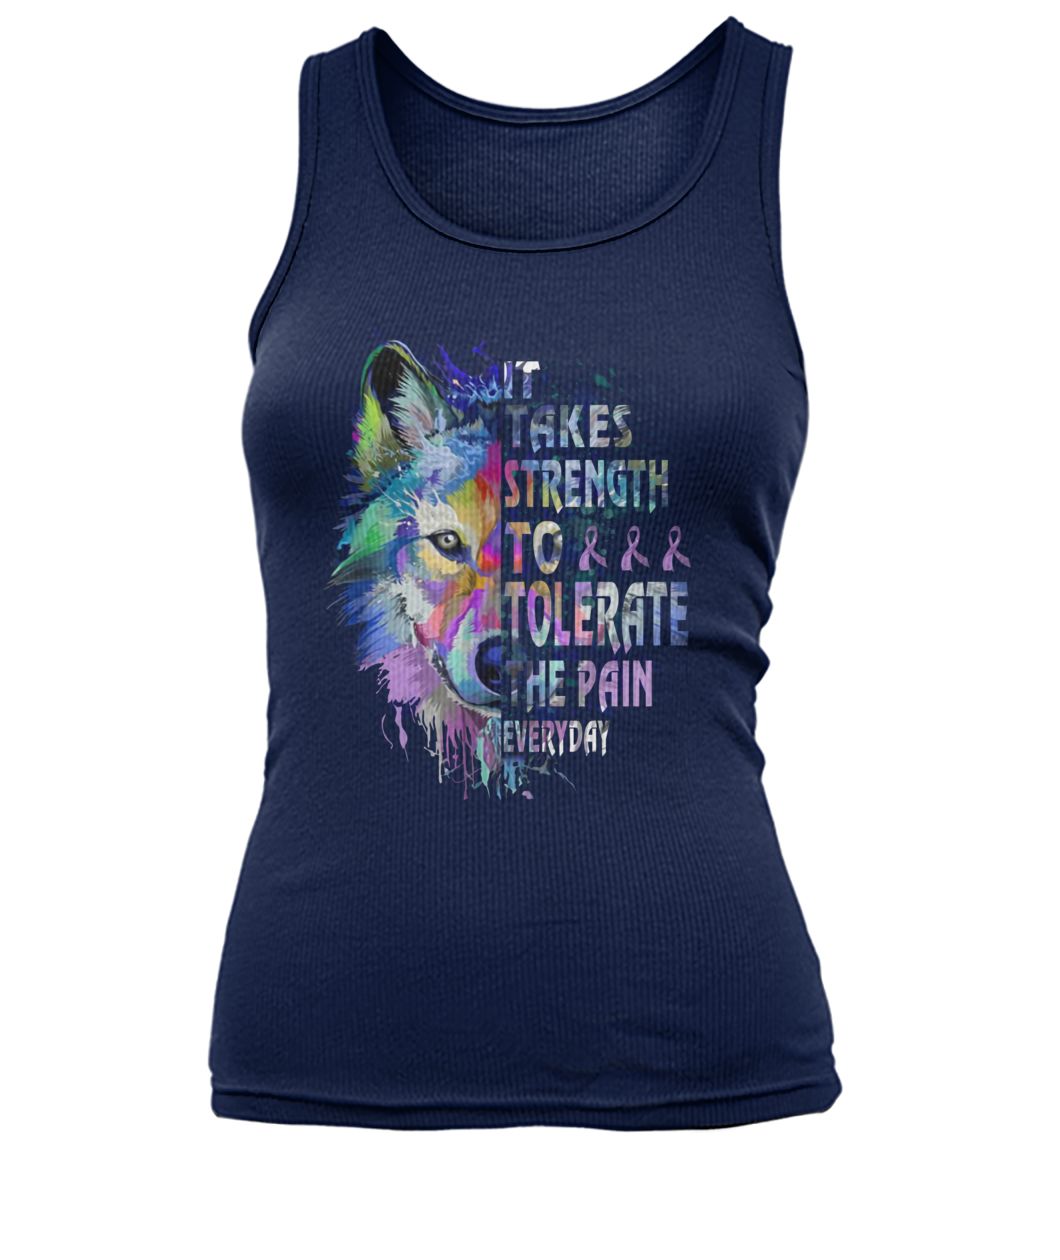 Wolf it takes strength to tolerate the pain everyday fibromyalgia awareness women's tank top